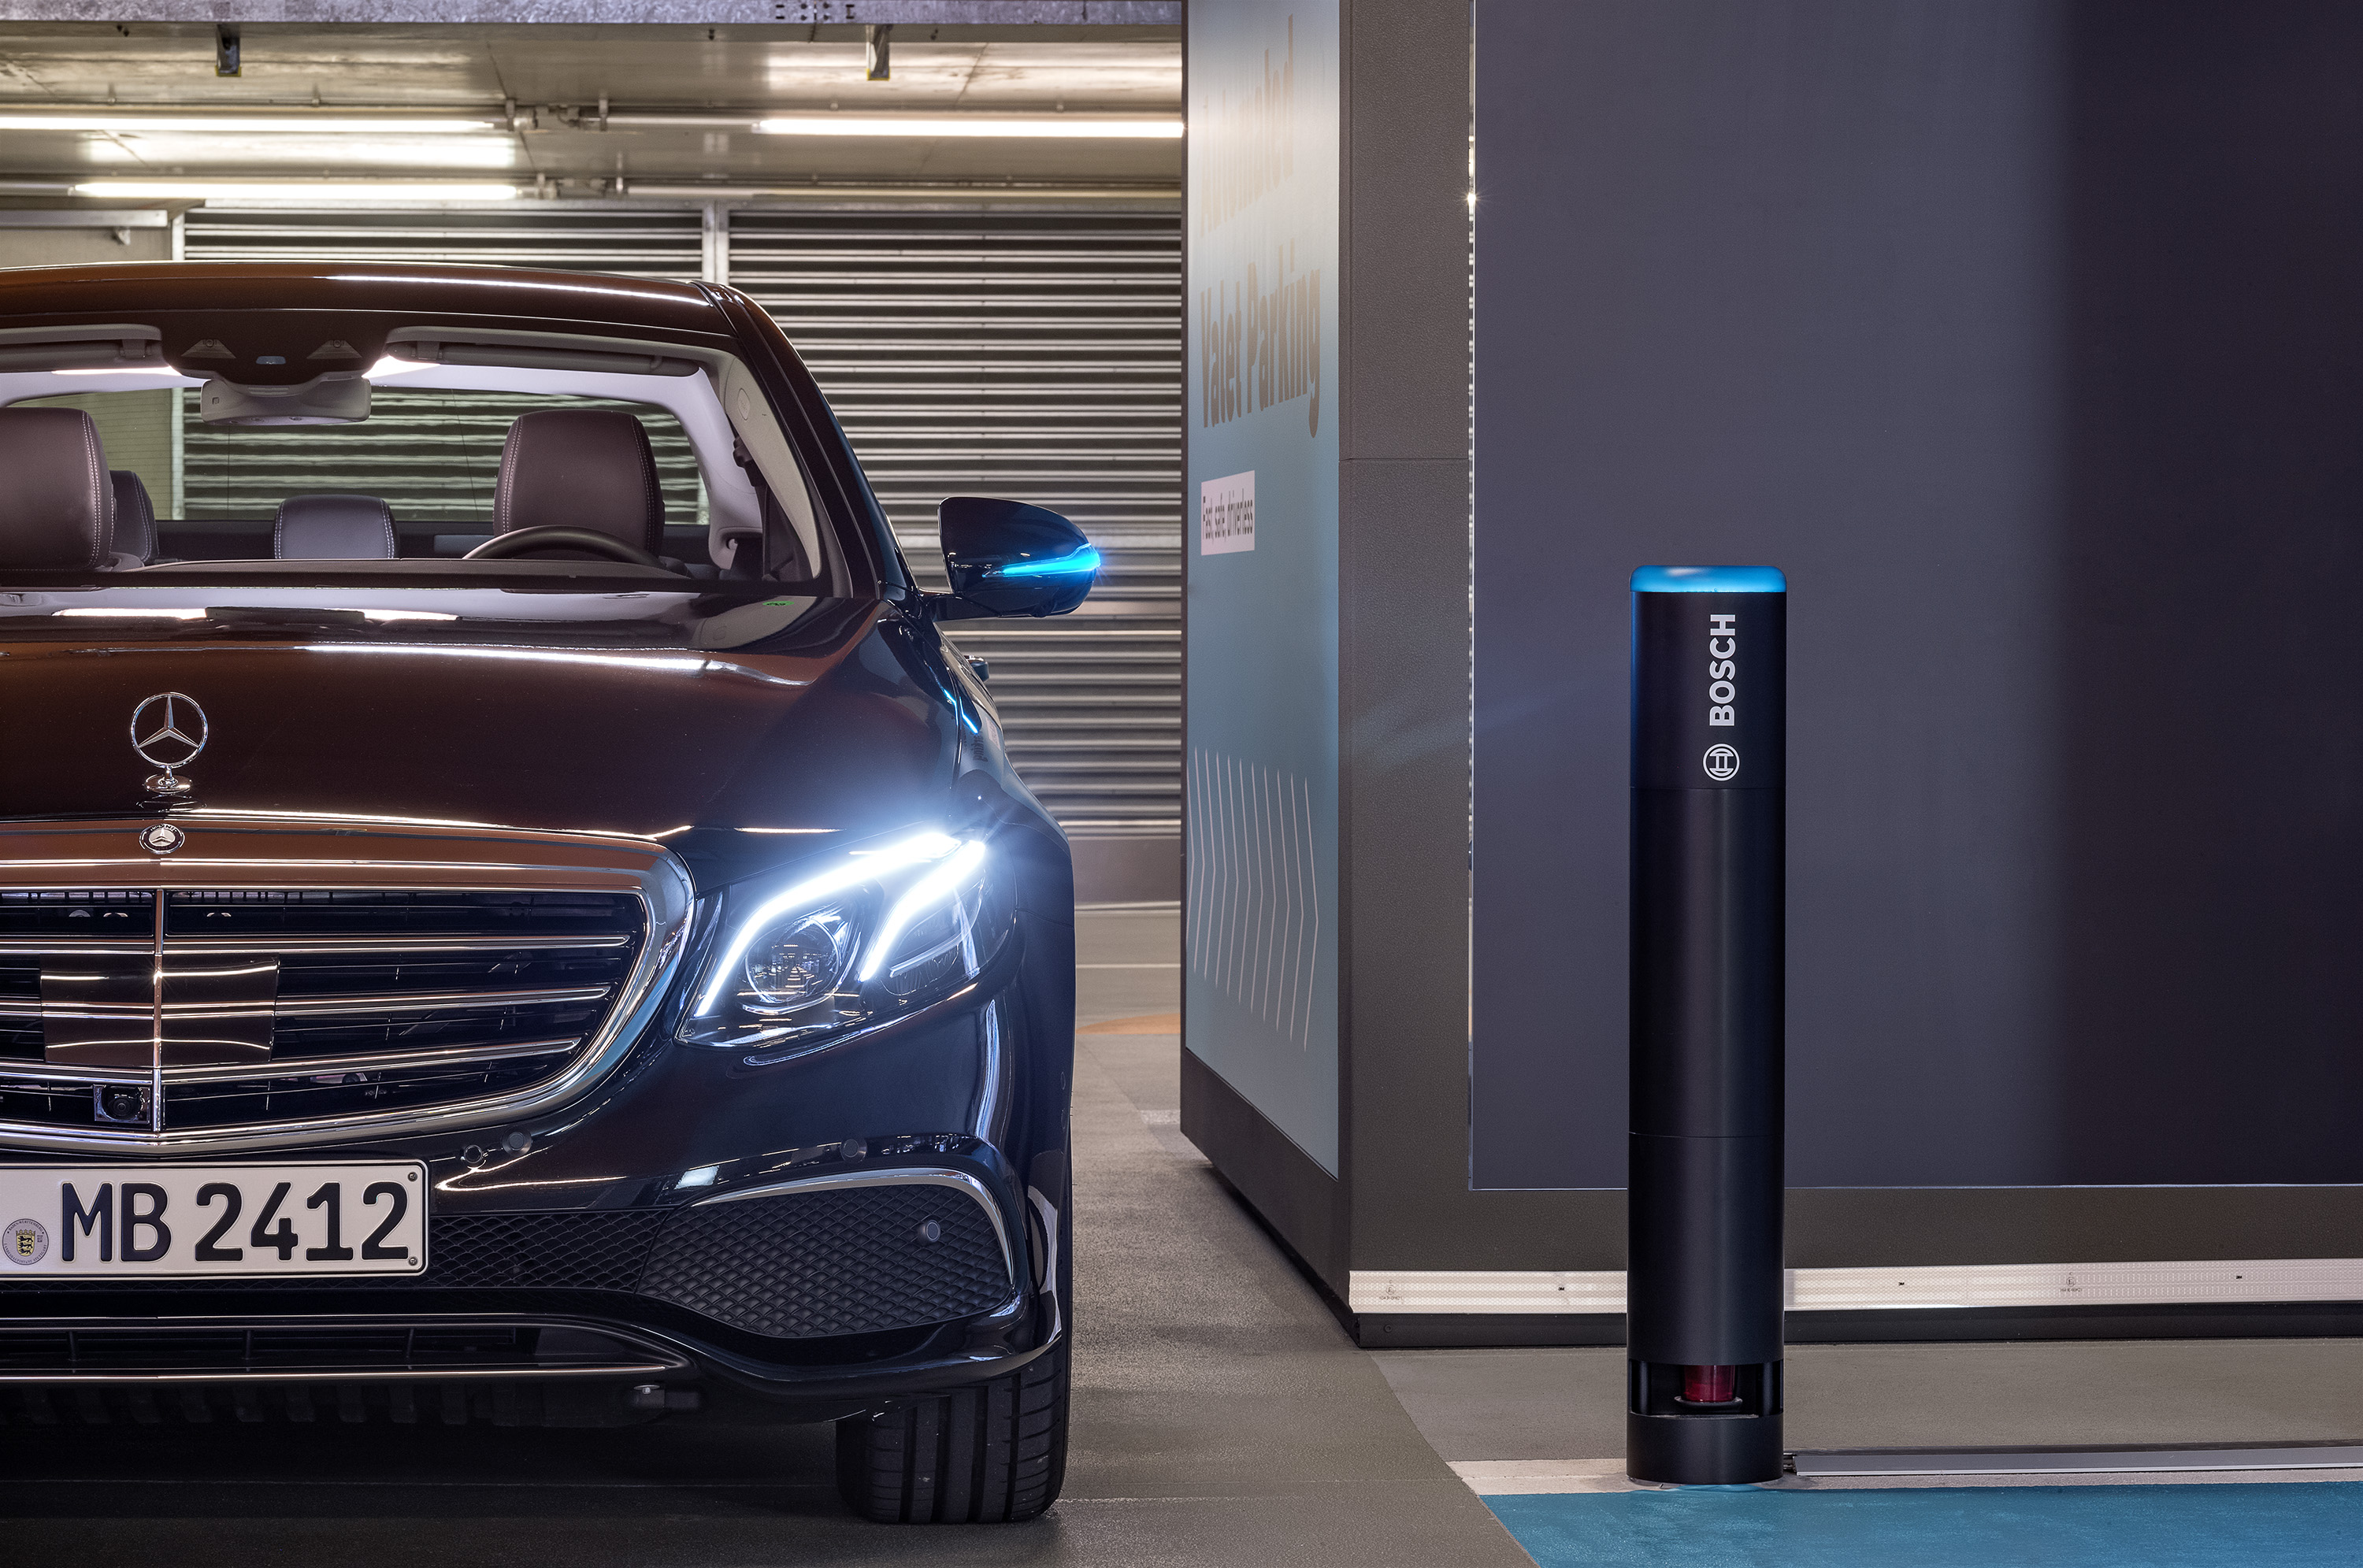 Bosch and Daimler demonstrate driverless parking in real-life conditions